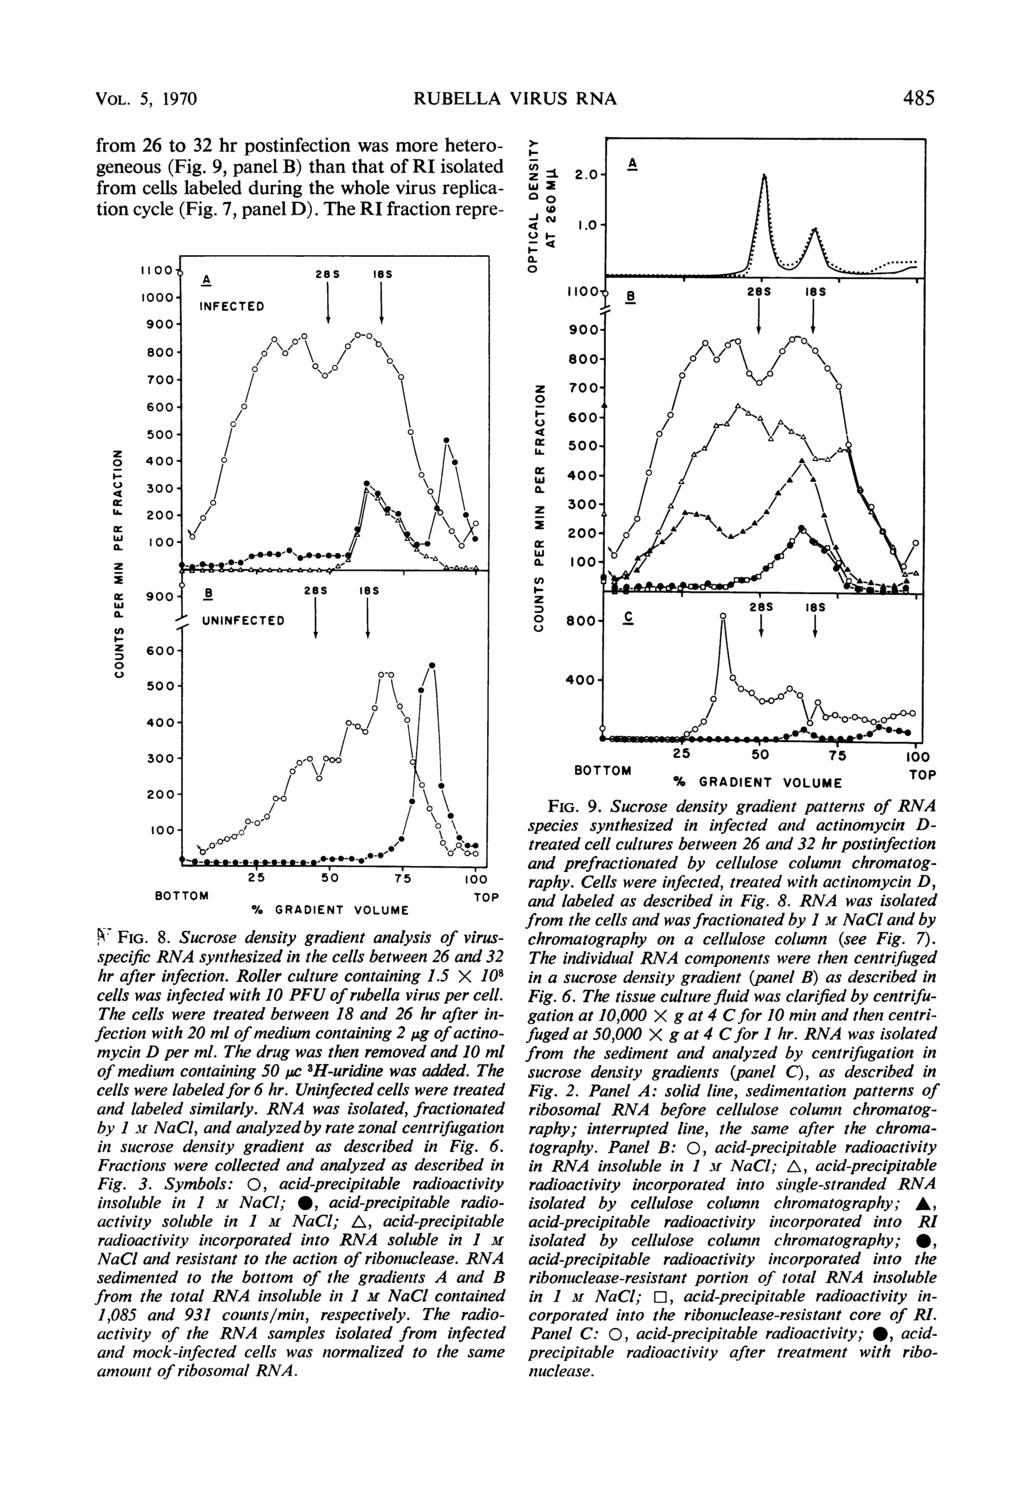 VOL. 5, 197 RUBELLA VIRUS RNA 485 11 A 28S l8s 1 9/.l,- ' 8 / \ 7 6- / from 26 to 32 hr postinfection was more heterogeneous (Fig.